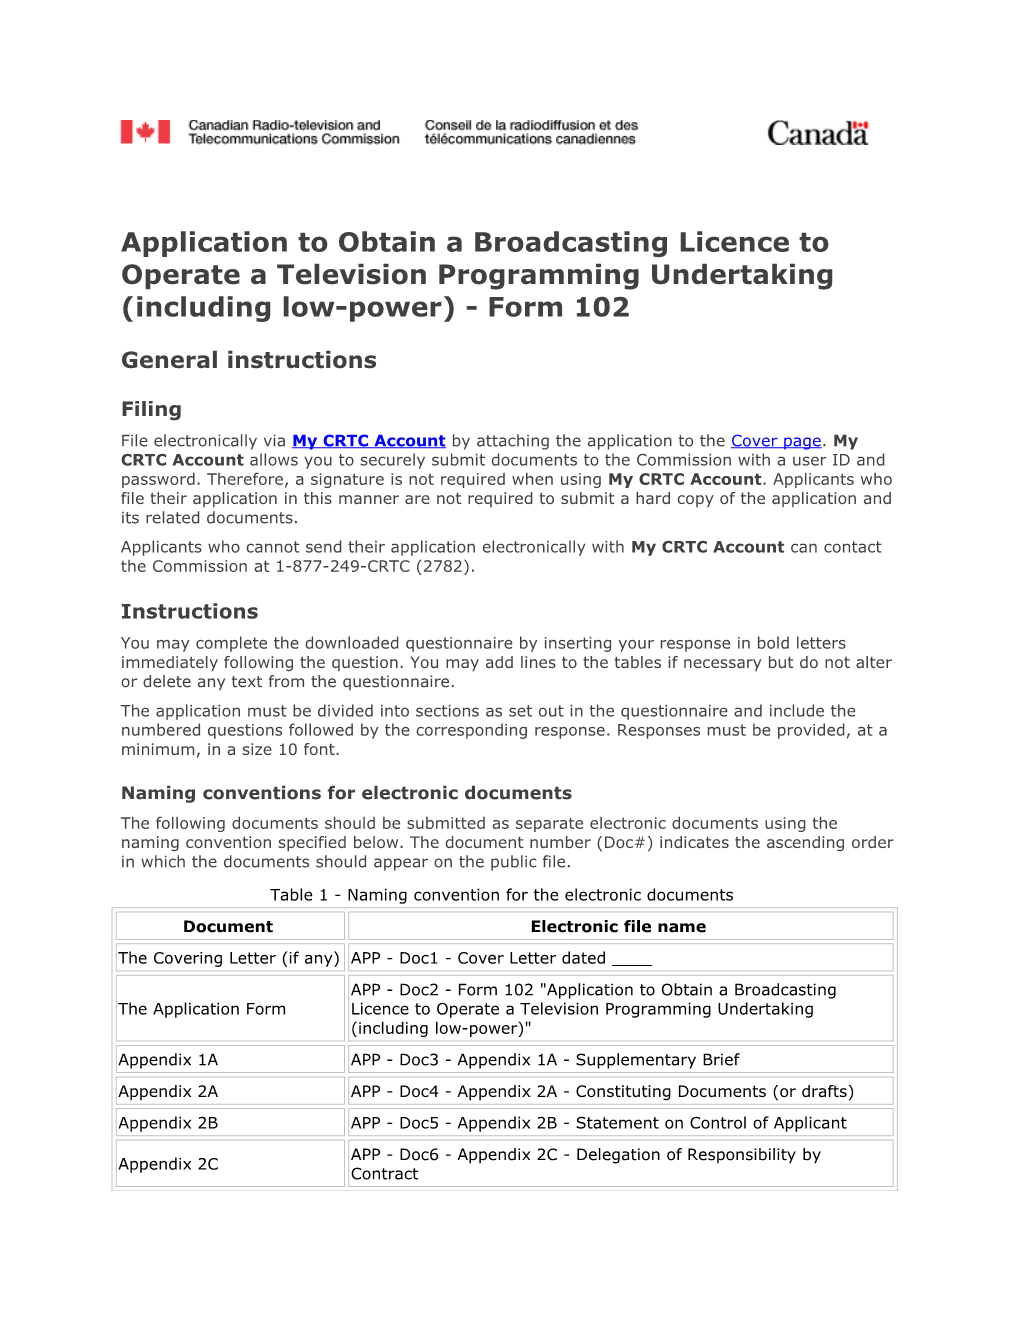 Application to Obtain a Broadcasting Licence to Operate a Television Programming Undertaking